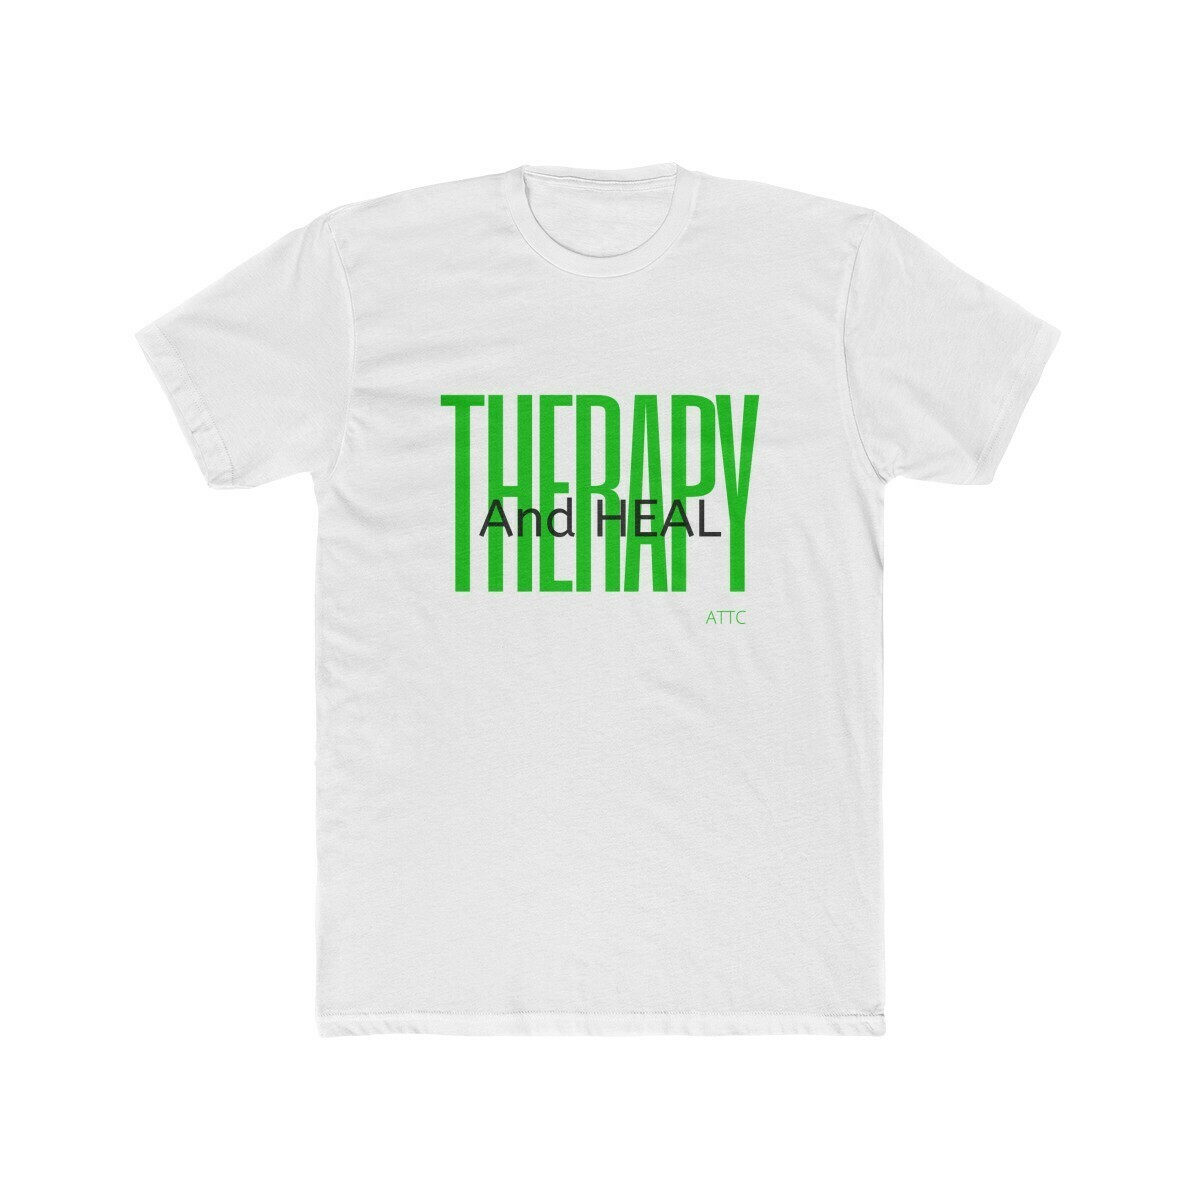 Men's Therapy And Heal Tee